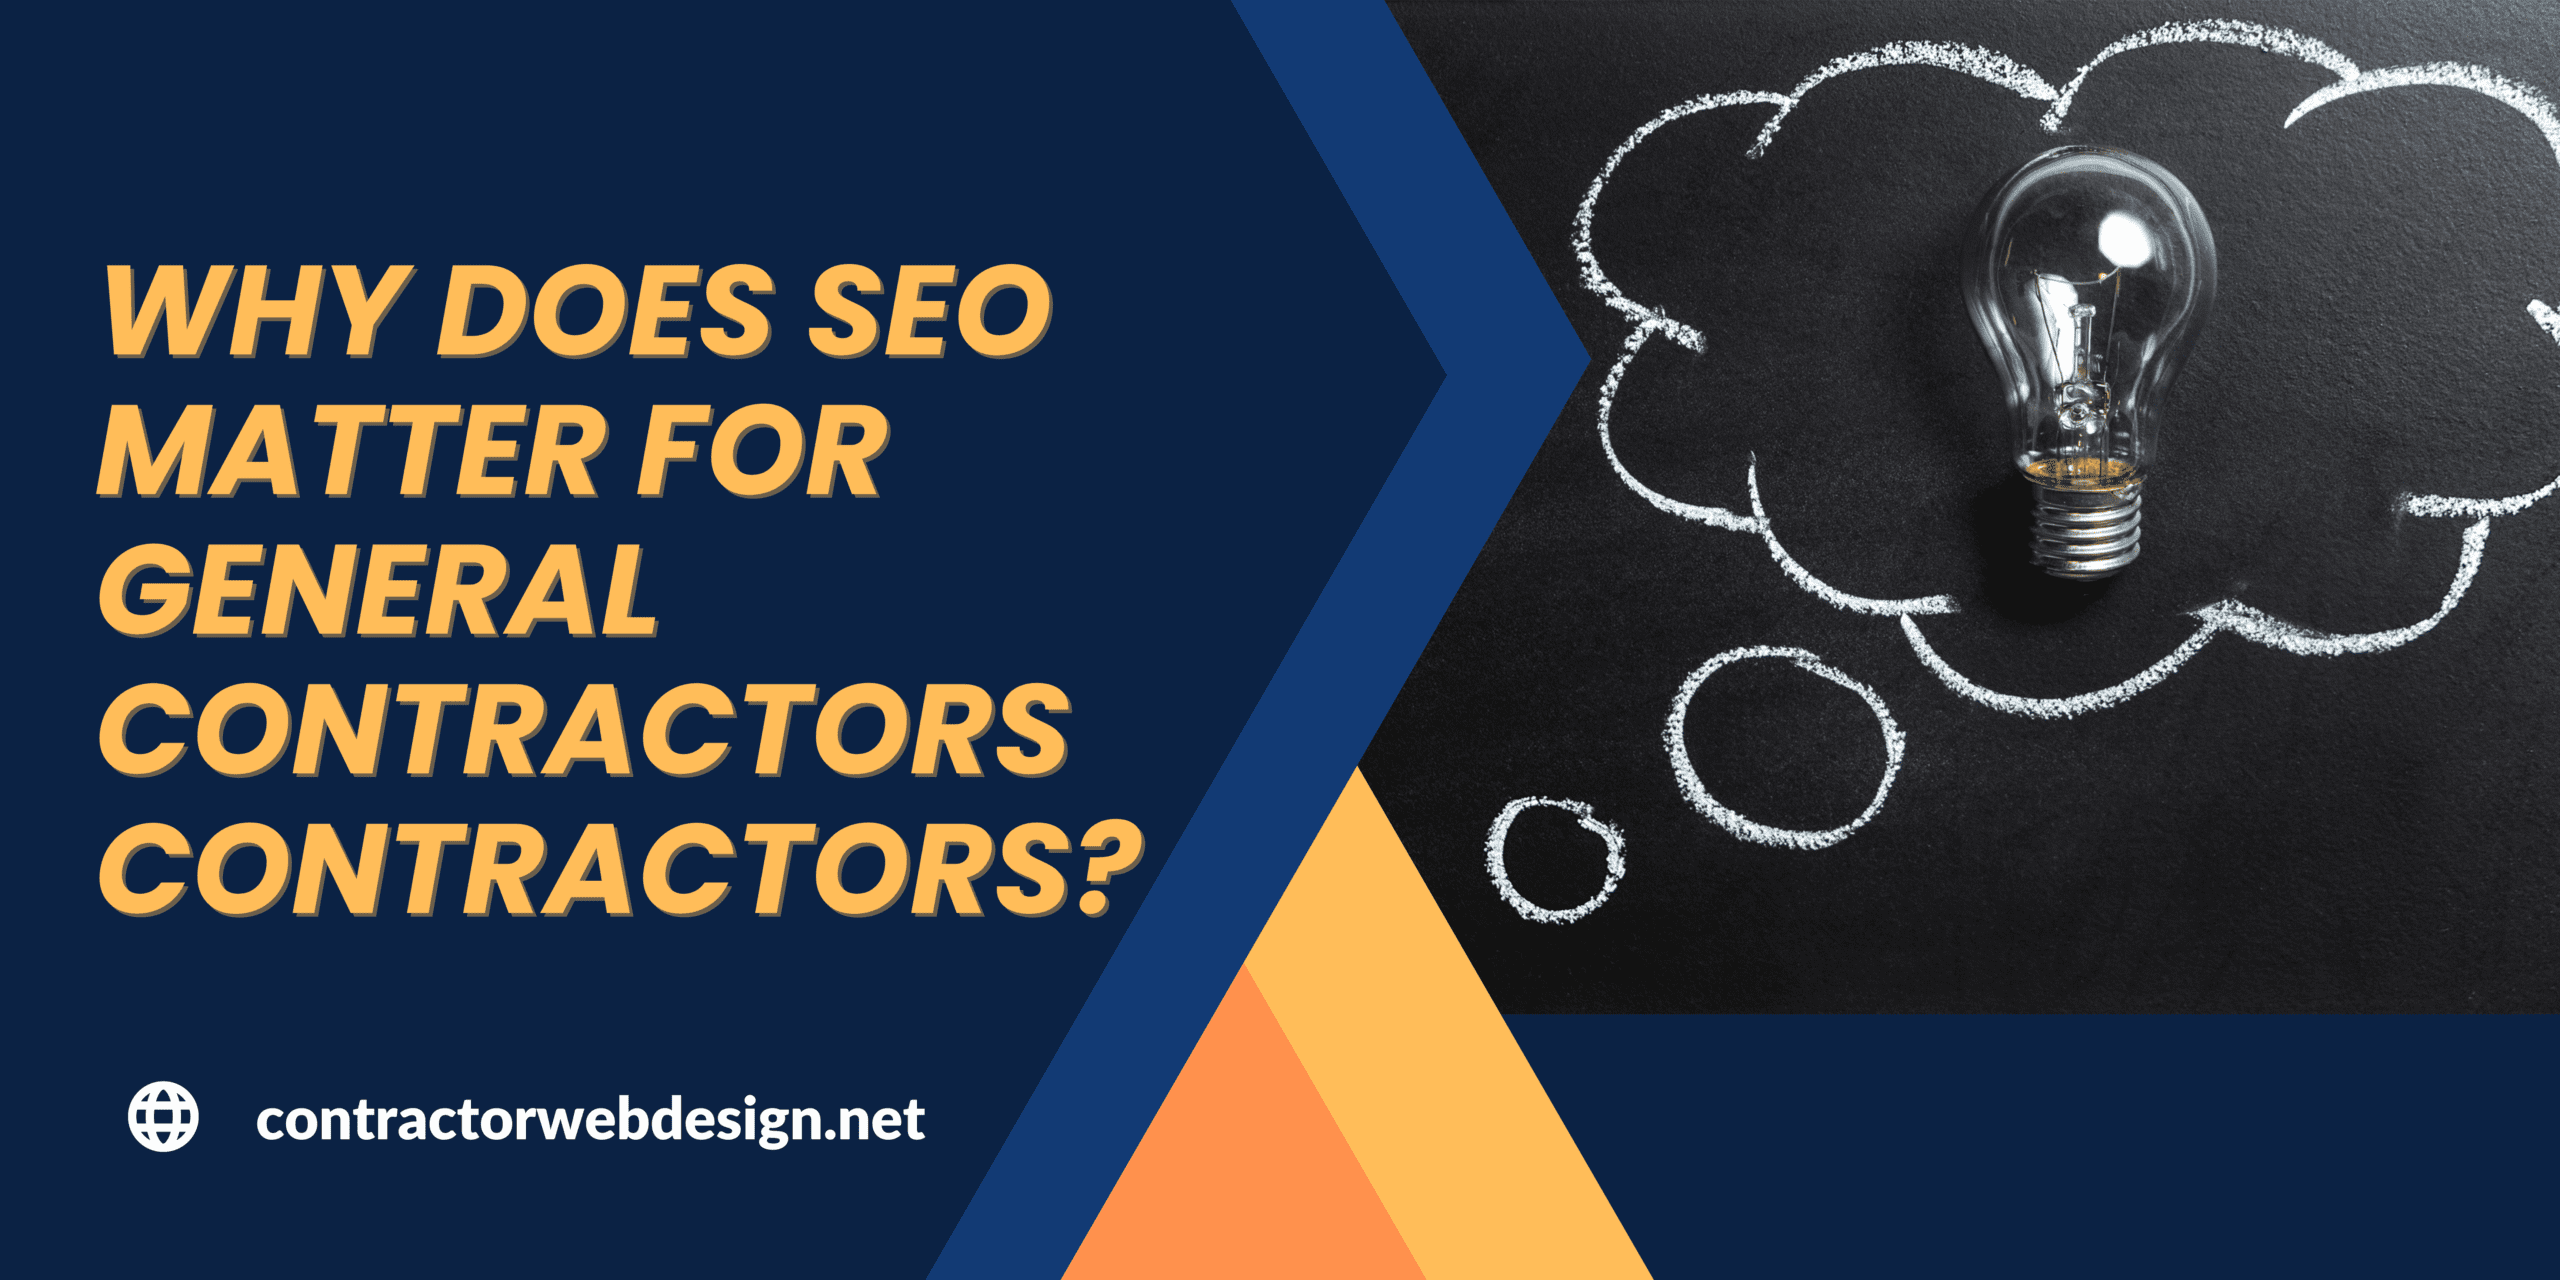 Why does SEO matter for General Contractors Contractors?